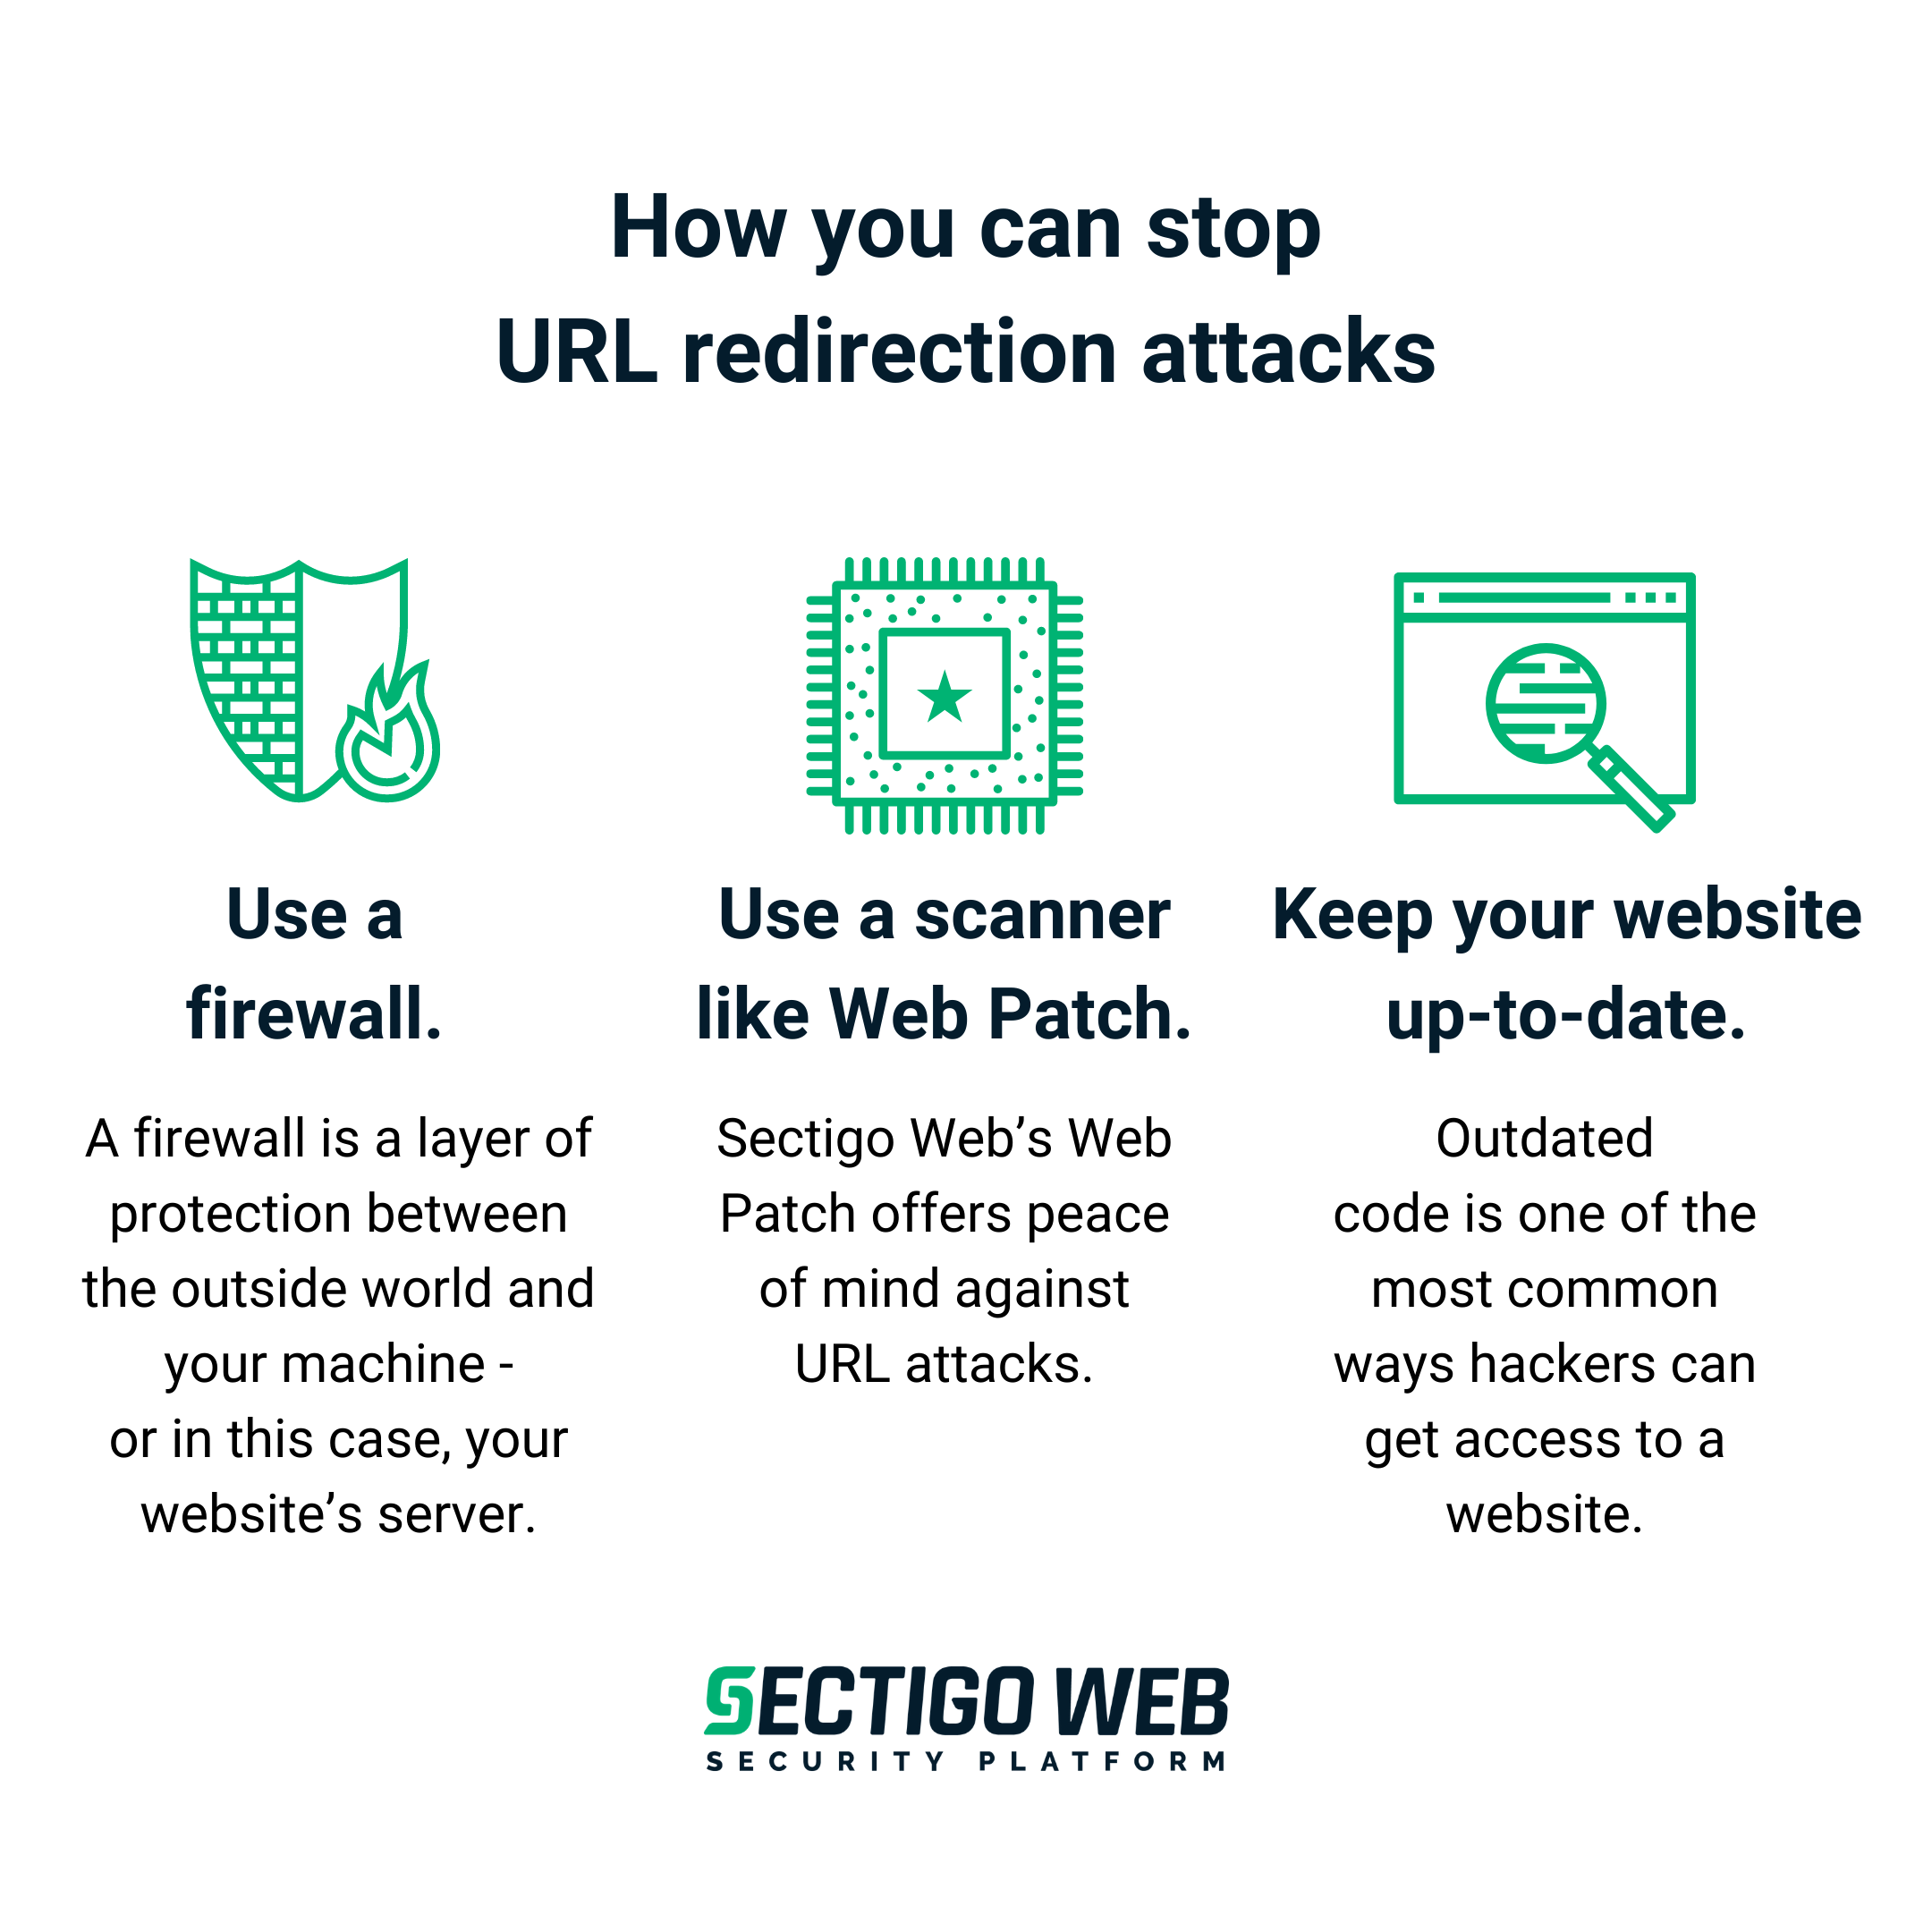 How you can stop URL redirection attacks